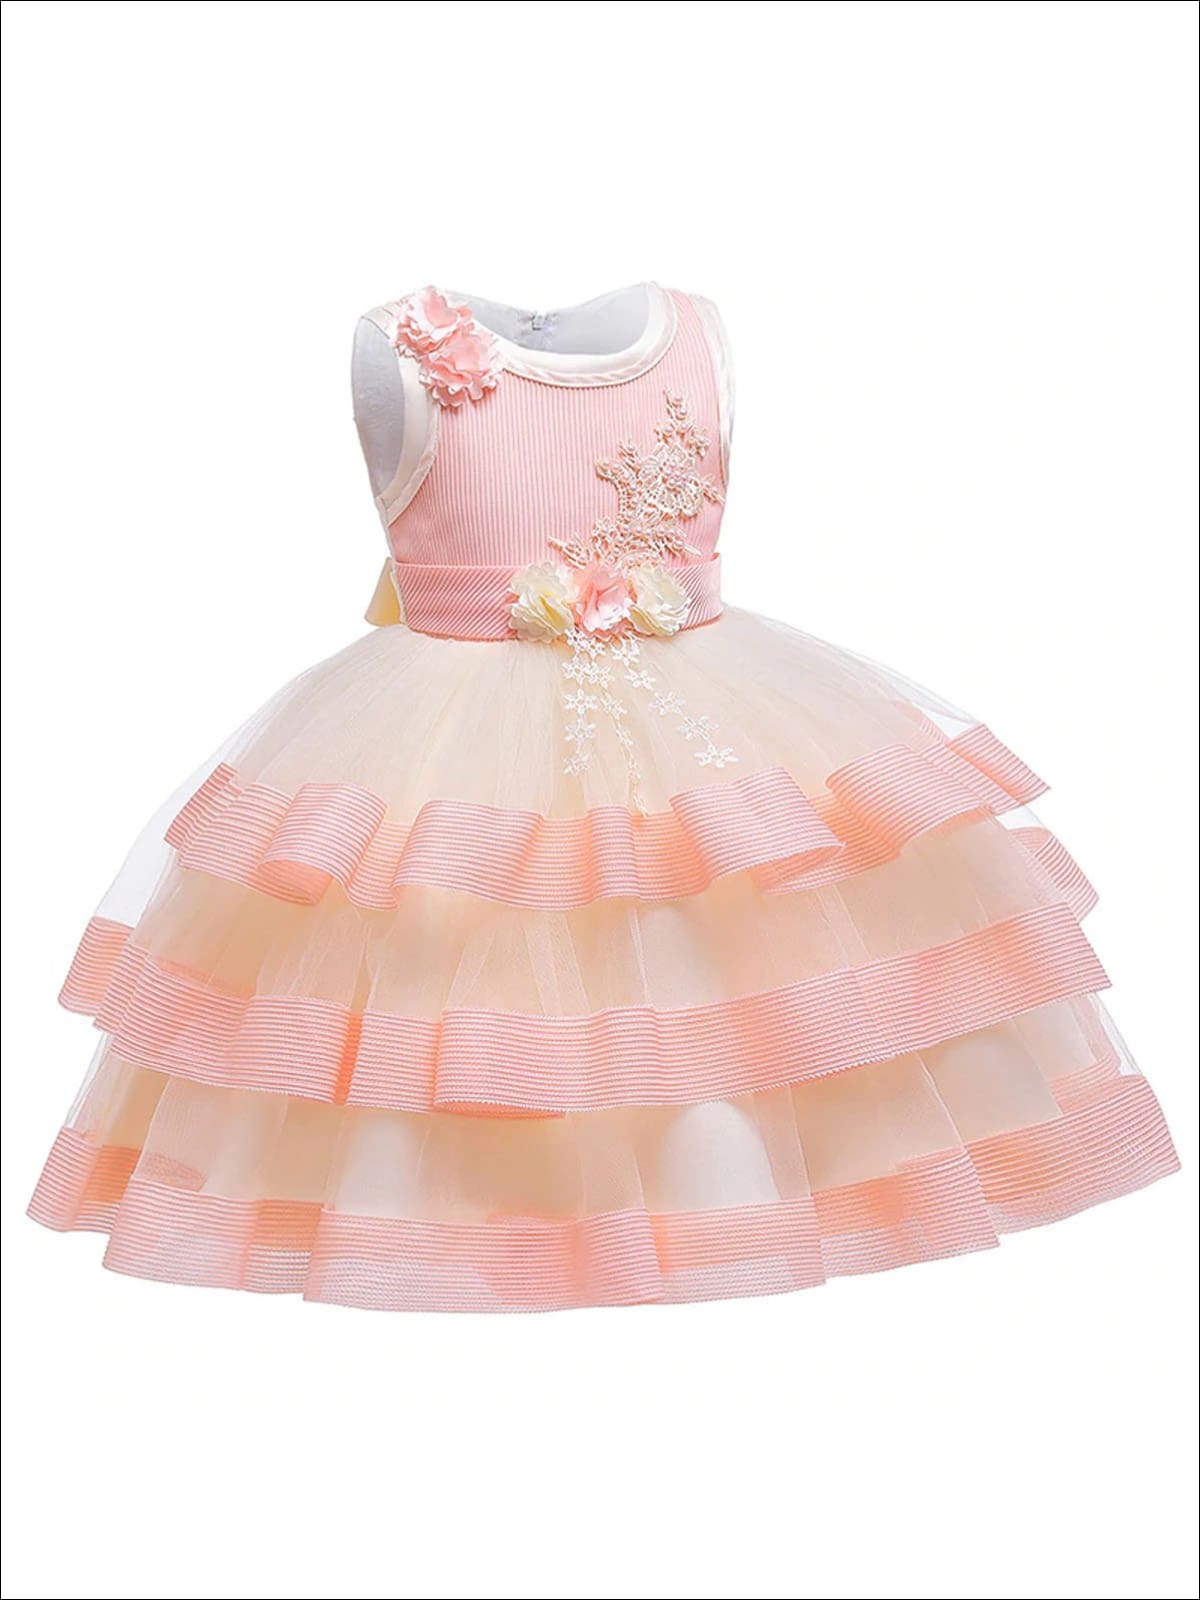 Little Girls Party Dresses | Floral Embroidered Tiered Princess Dress